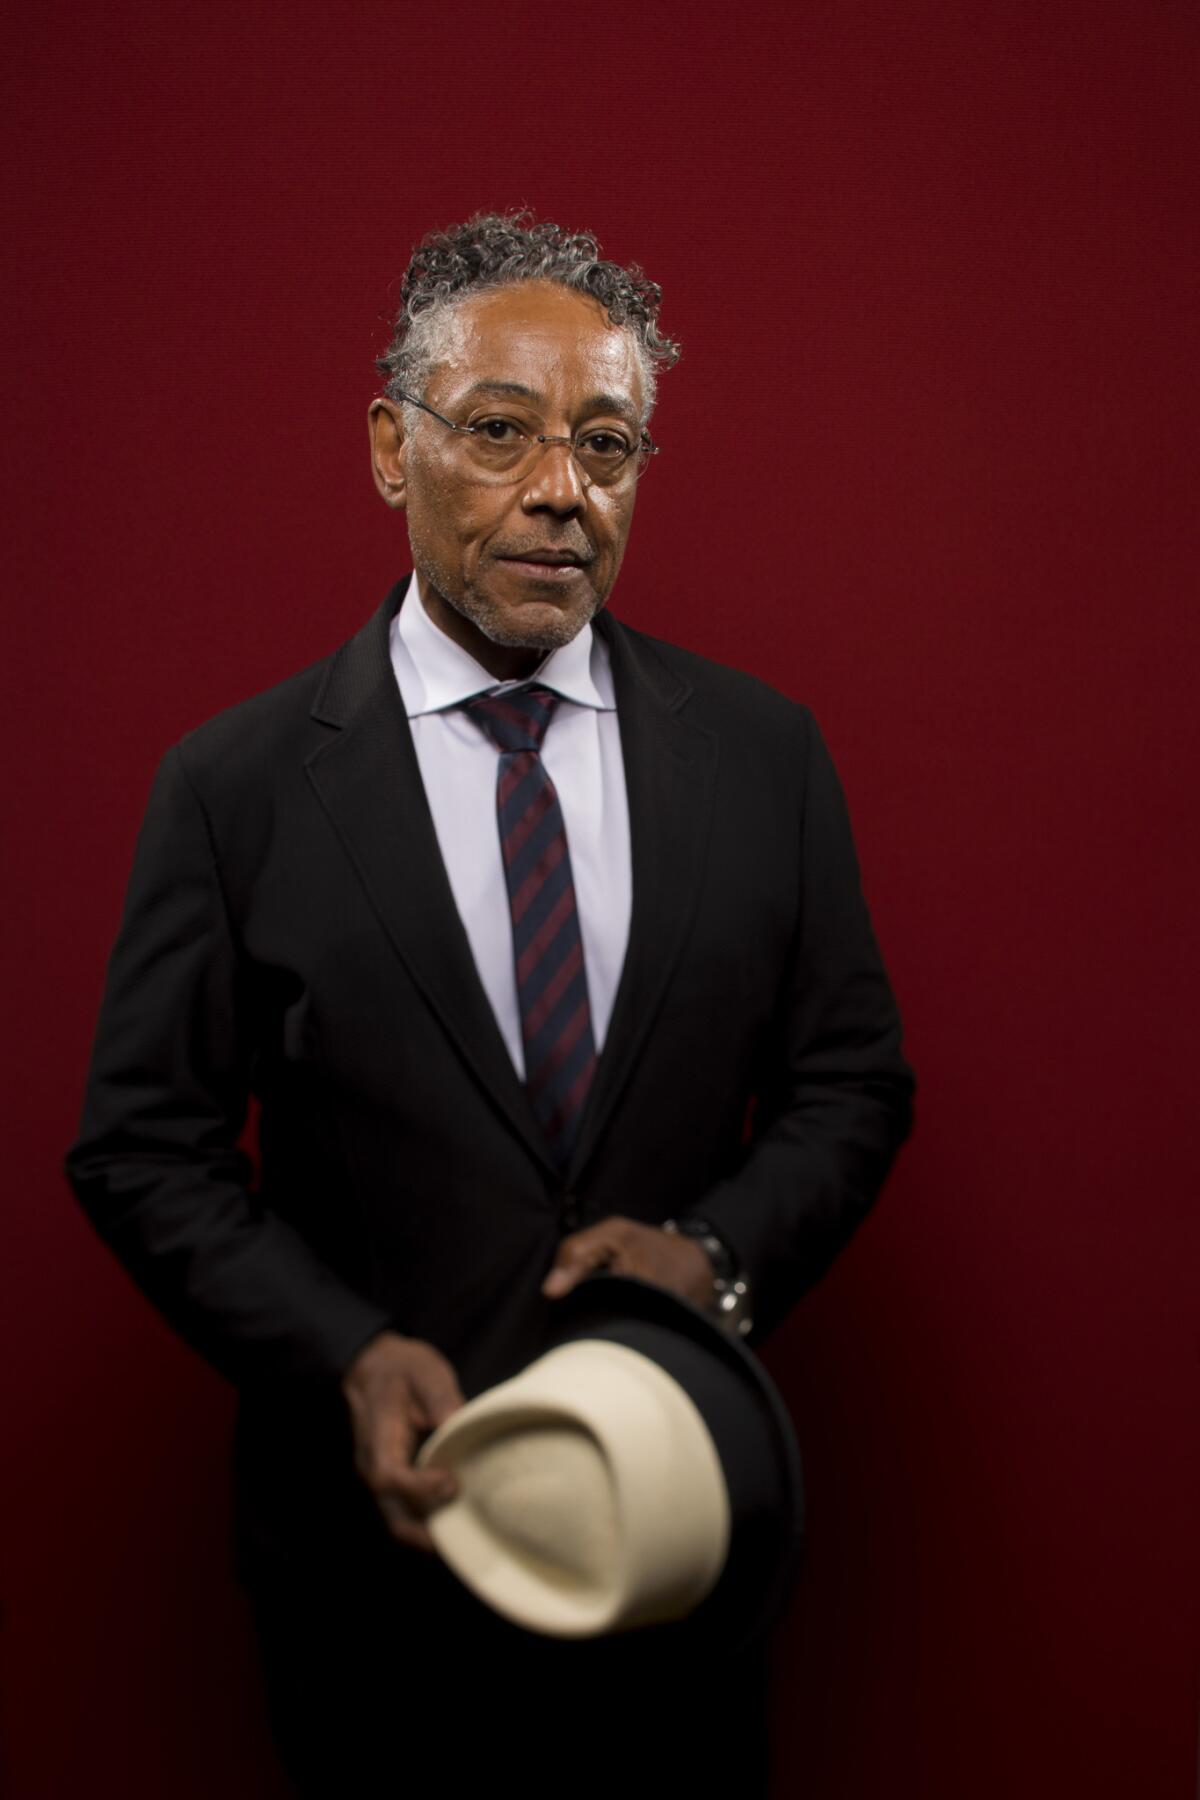 SAN DIEGO, CALIF. -- JULY 19, 2018-- Giancarlo Esposito from the television series "Better Call Saul"